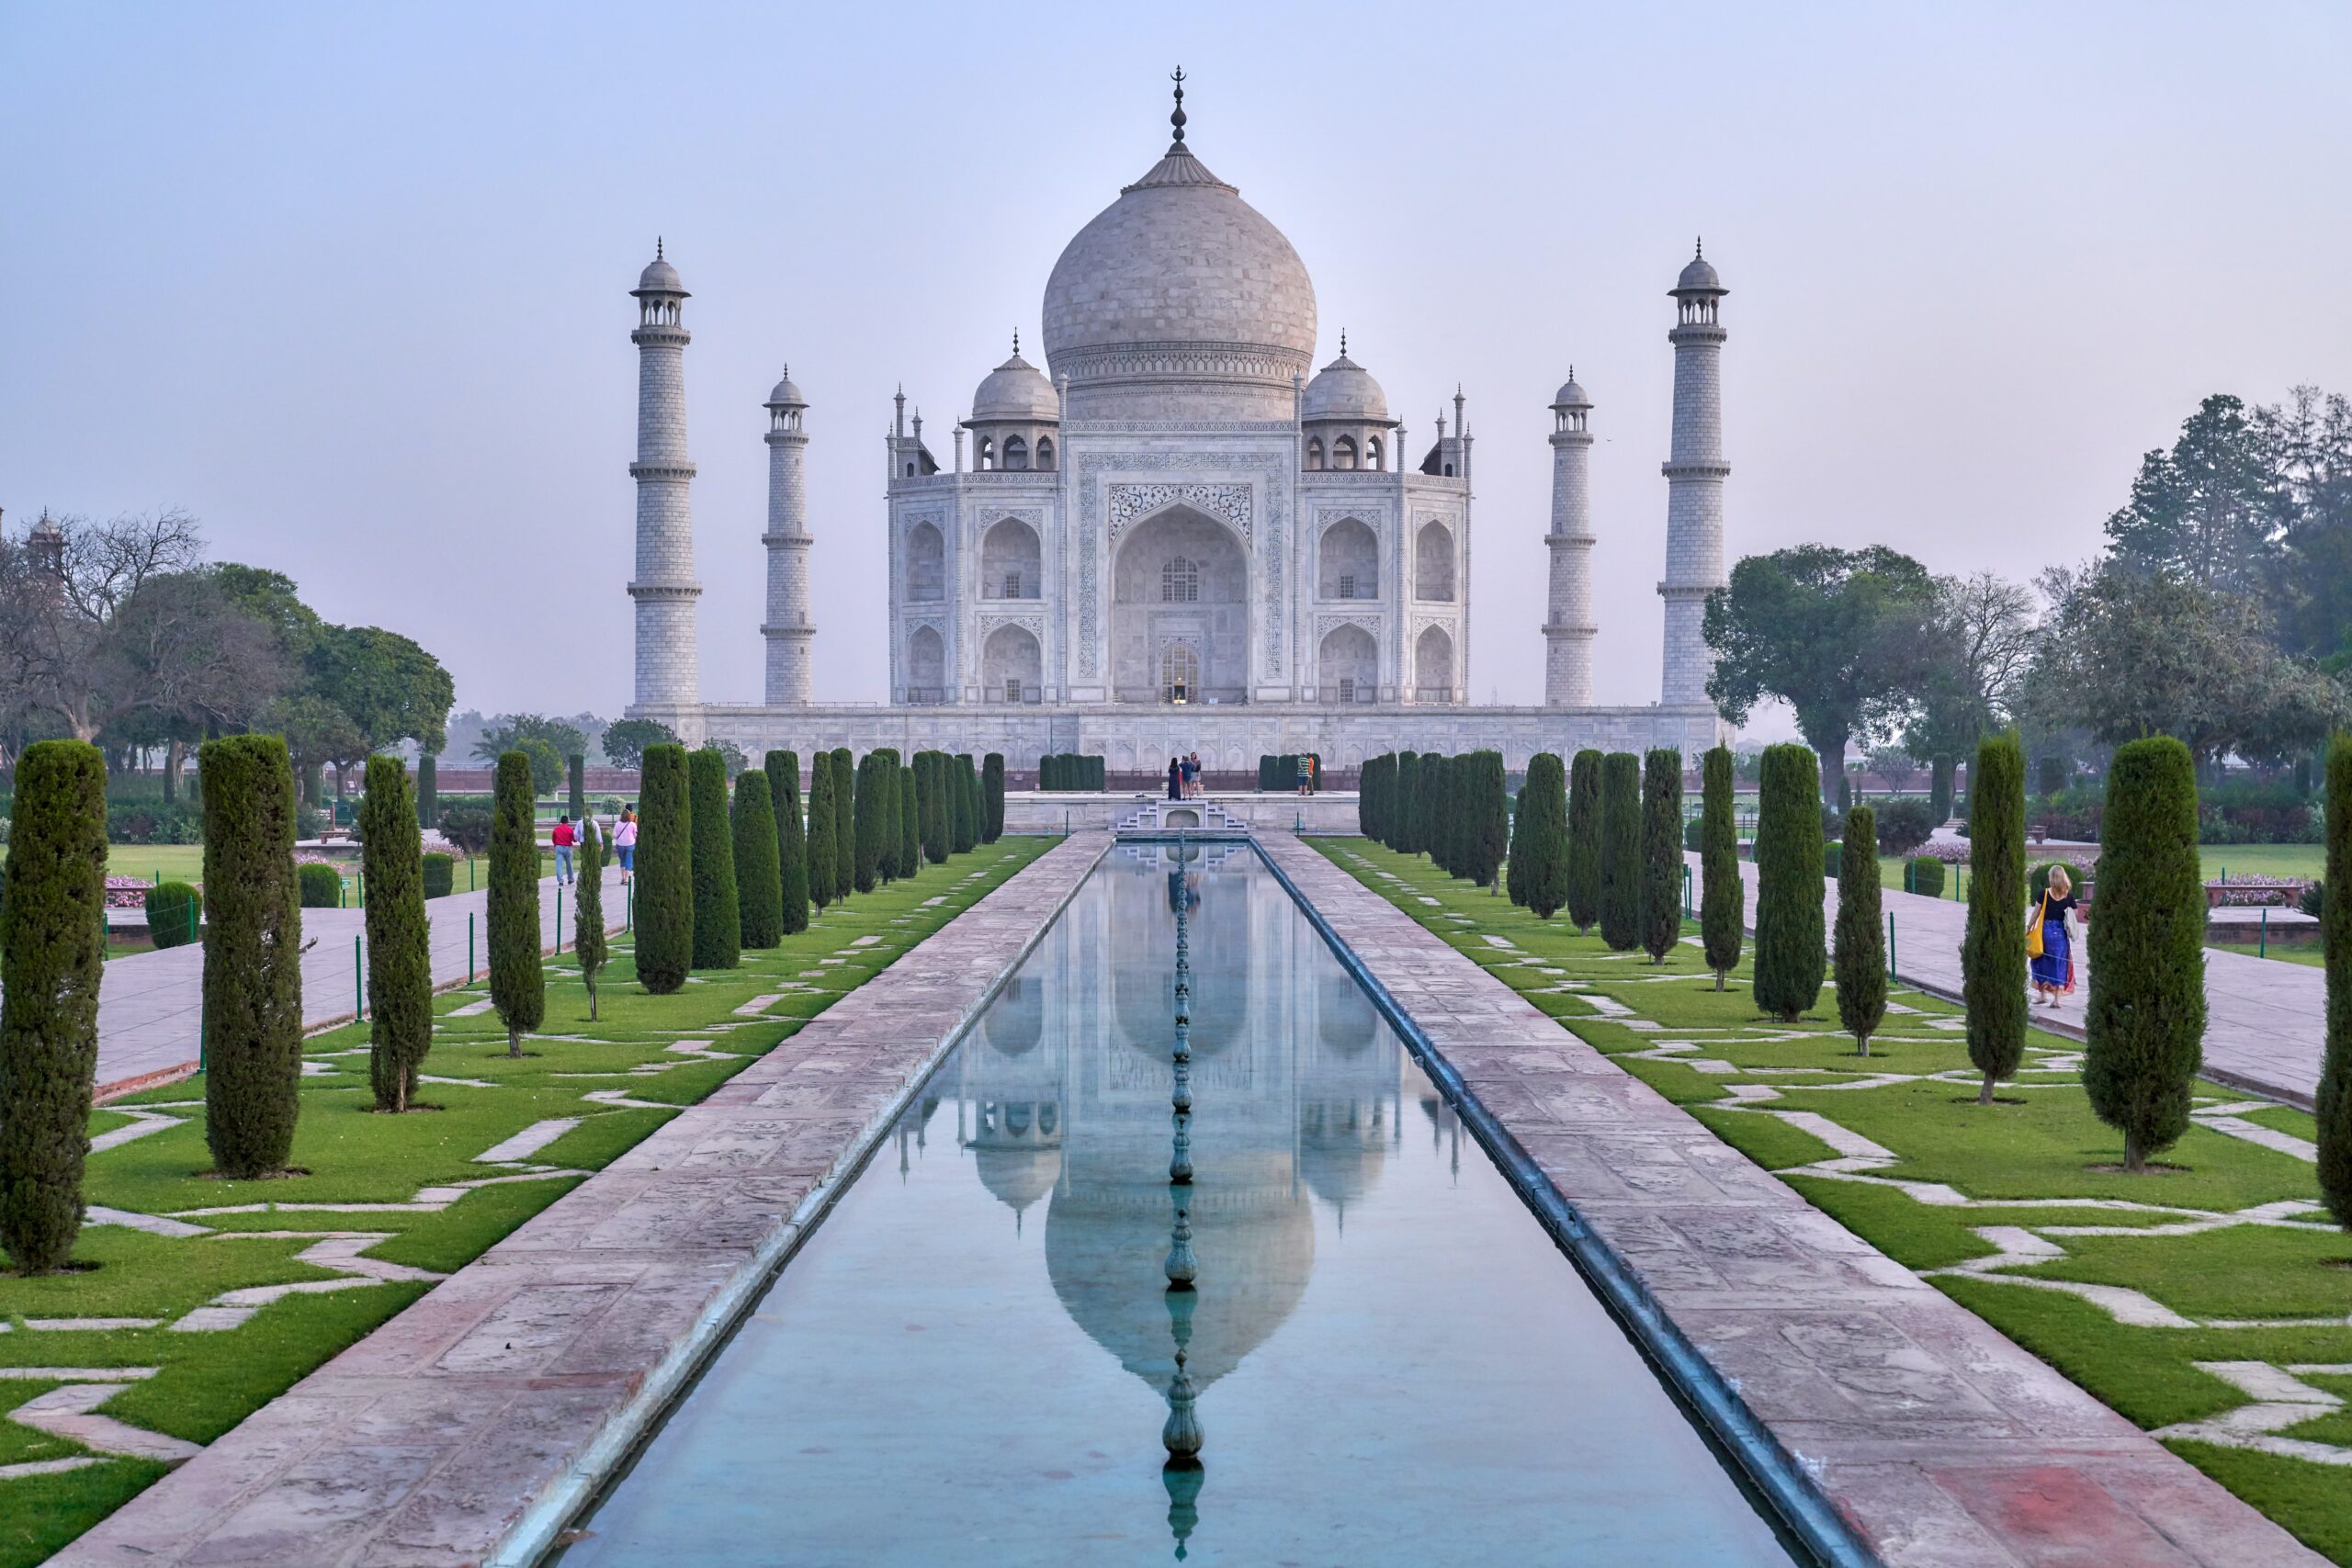 View of the Taj Mahal, one of the world's wonders, situated in India